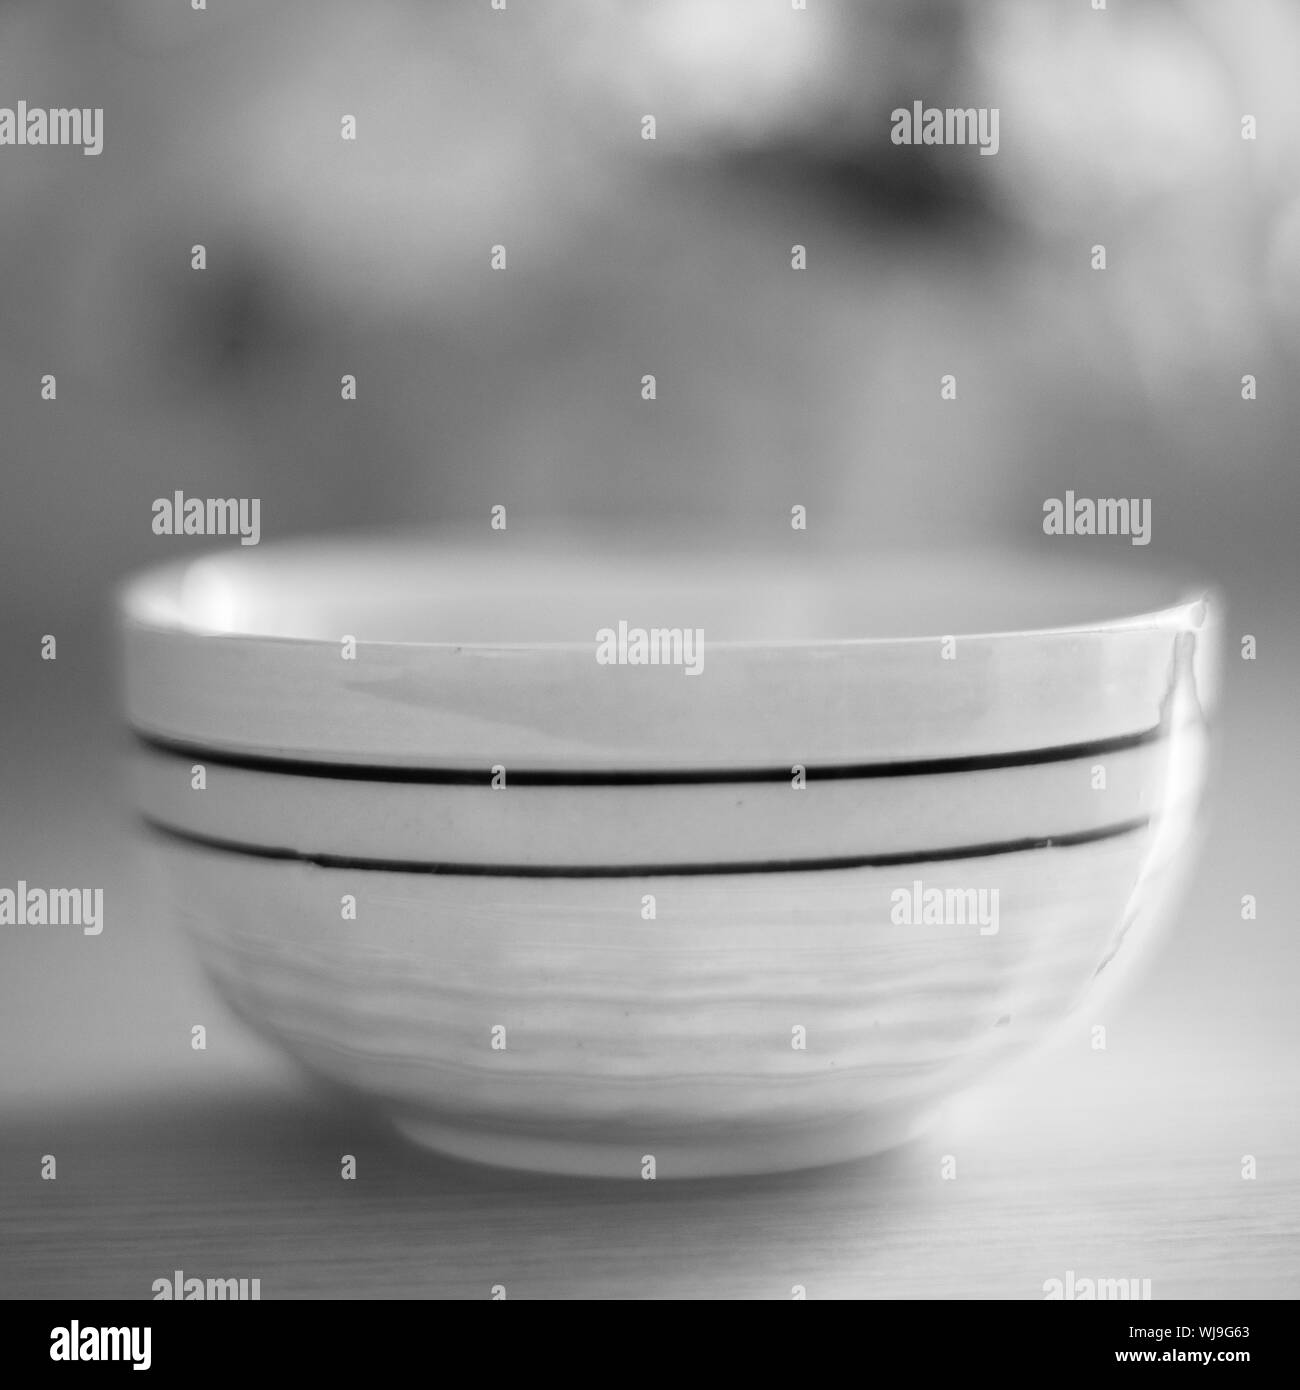 ceramic bowl with a striped pattern on the table, bw photo, soft selective focus. Stock Photo